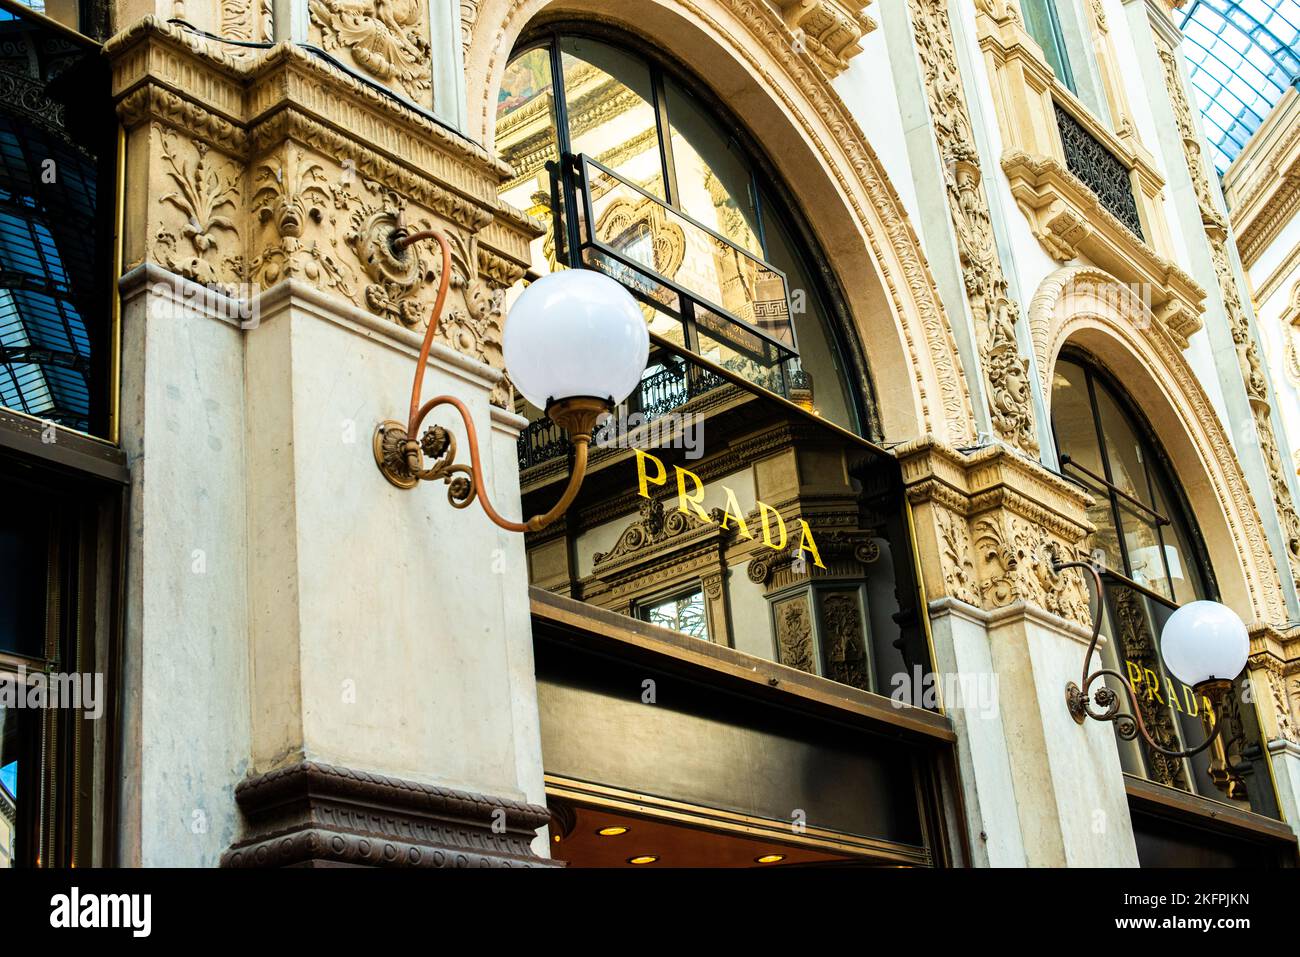 Milan, Italy, 20 December 2018:  Prada Store in Galleria Vittorio Emanuele II shopping mall in Milan, with shoppers and tourists strolling around. Pra Stock Photo